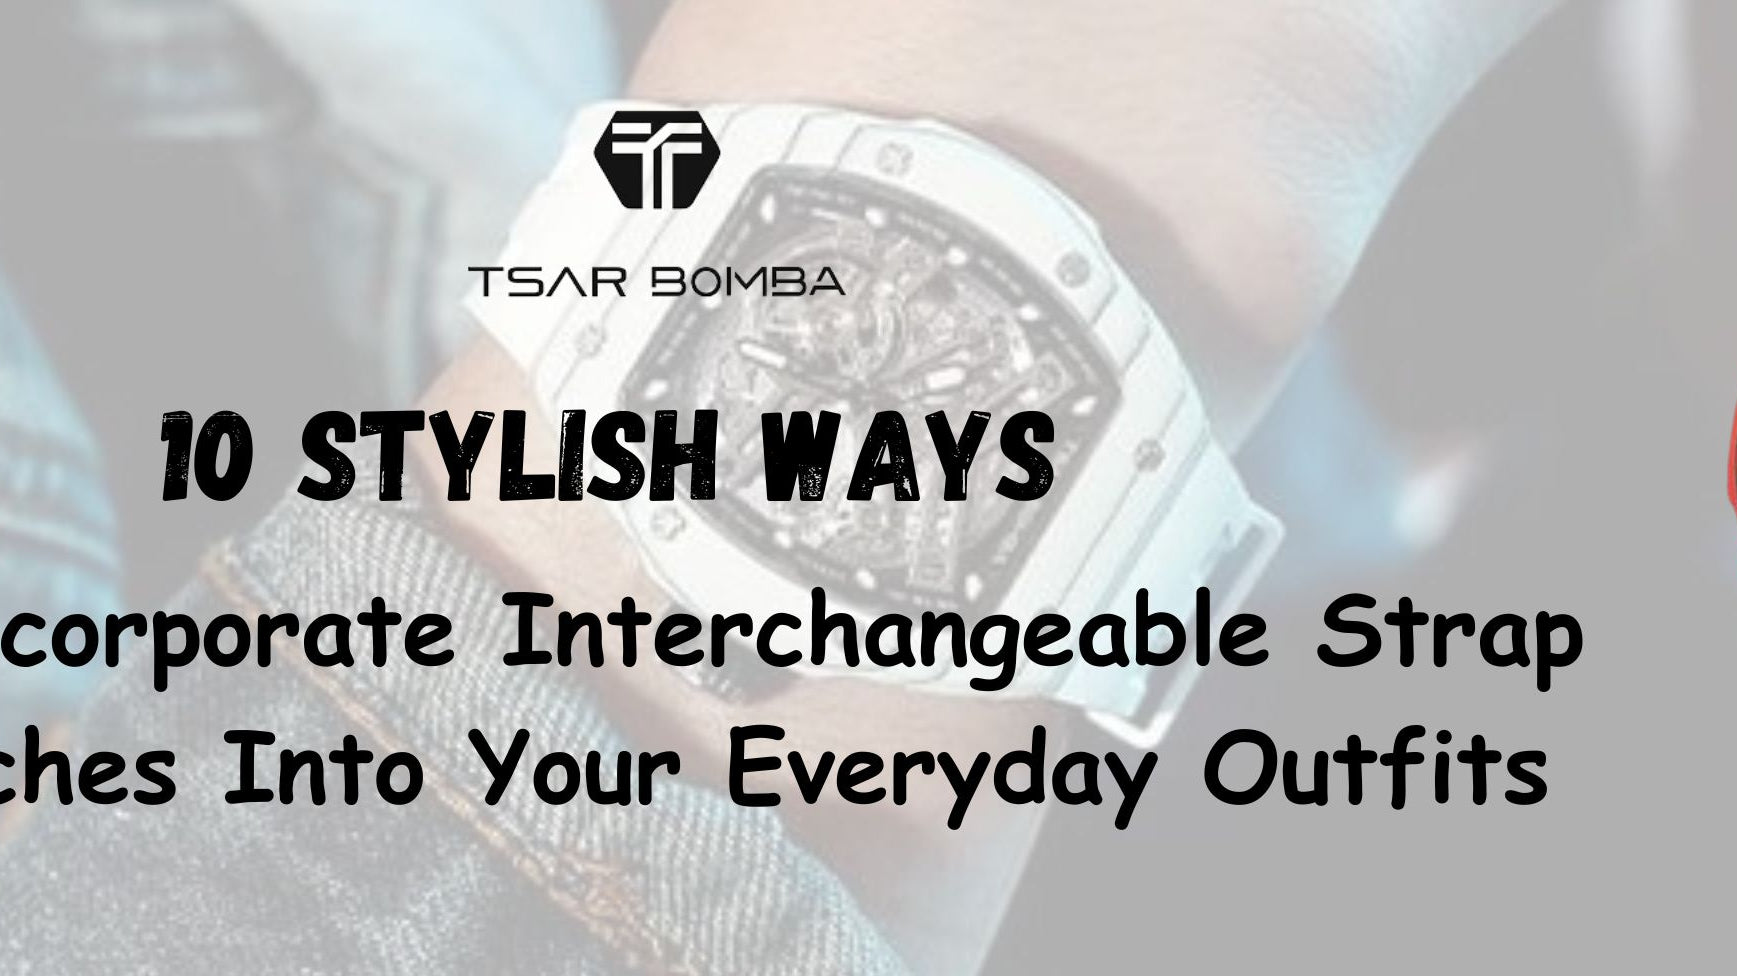 10 Stylish Ways To Incorporate Interchangeable Strap Watches Into Your Everyday Outfits 💫